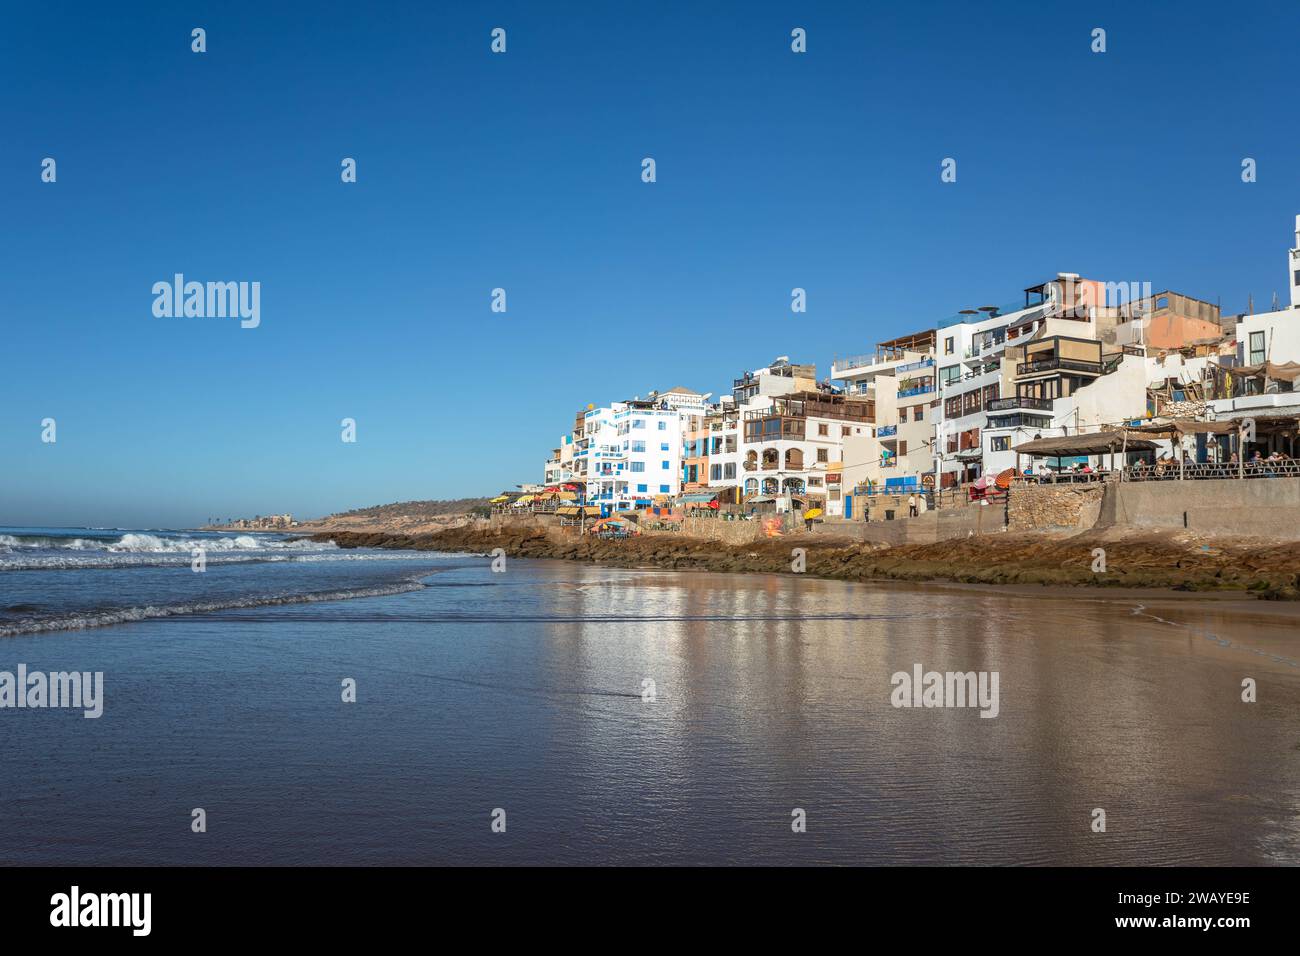 Beach front houses / cafes overlooking the Atlantic Ocean and beaches in the fishing village of Taghazout, Morocco, North Africa on a sunny day Stock Photo